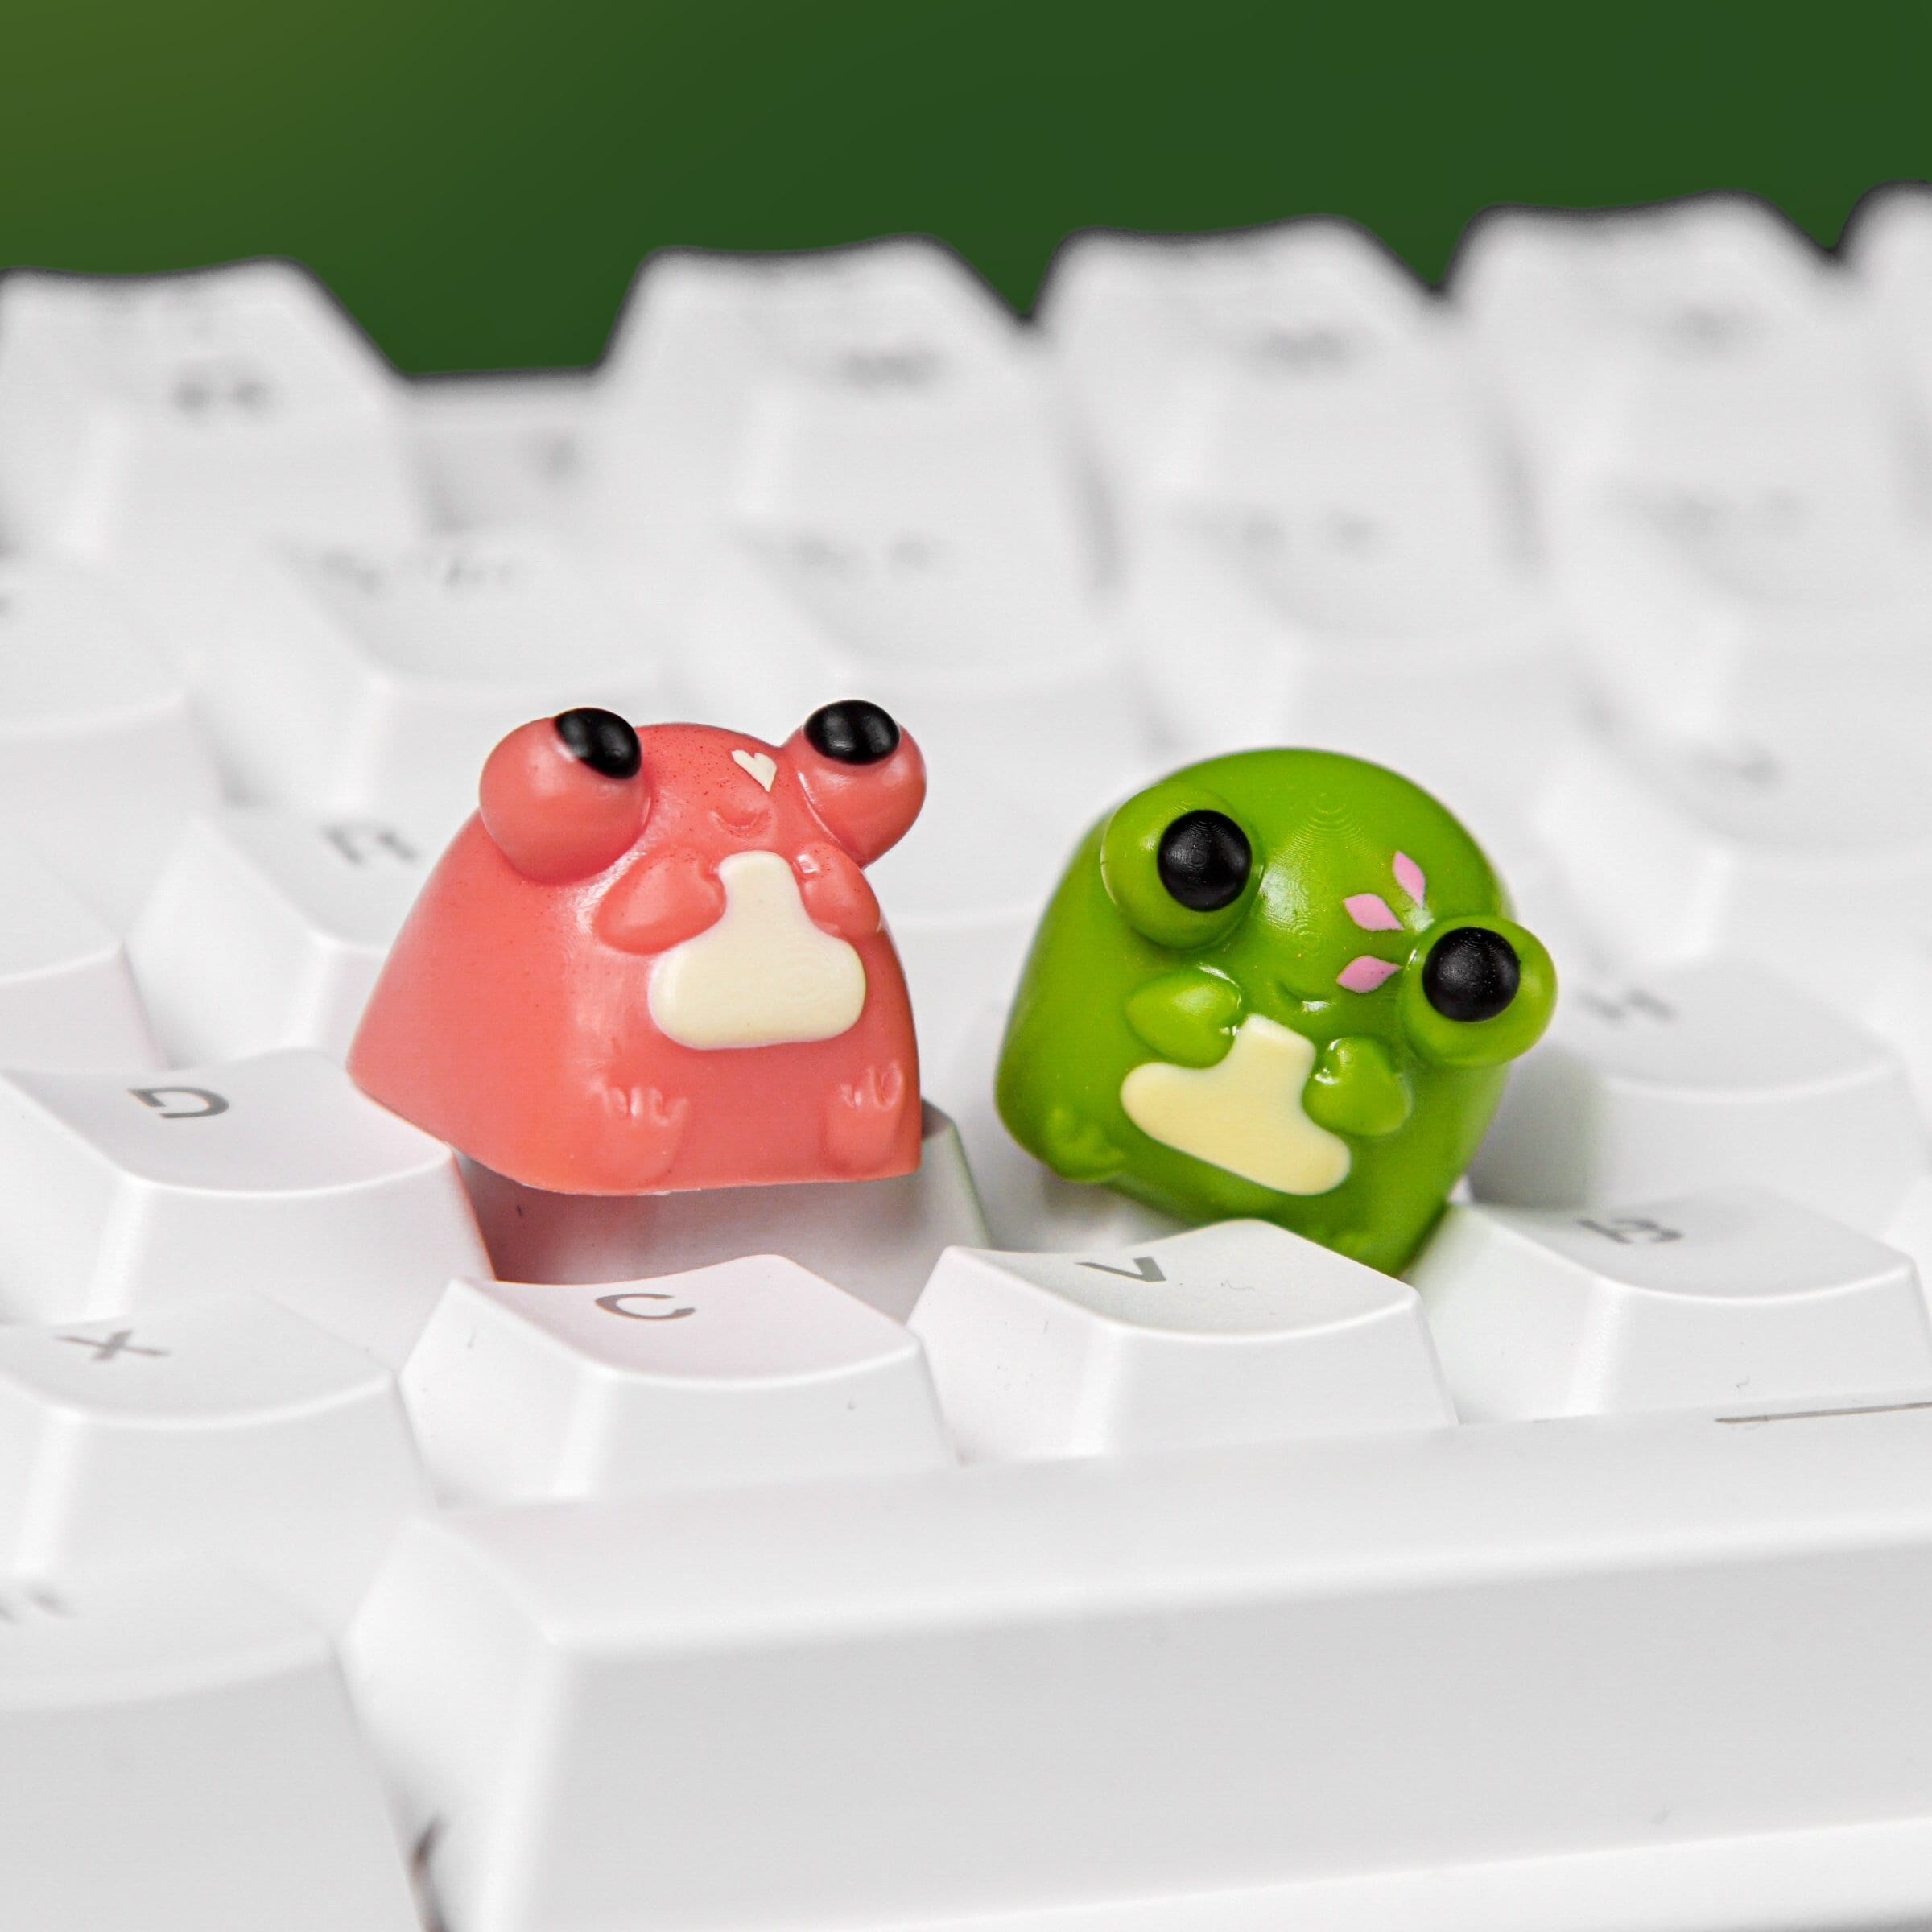 Frog Keycap, Frog Artisan Keycap, Funny Keycap, Resin Keycap, Keycap for MX Cherry Switches Keyboard, Gift for Her